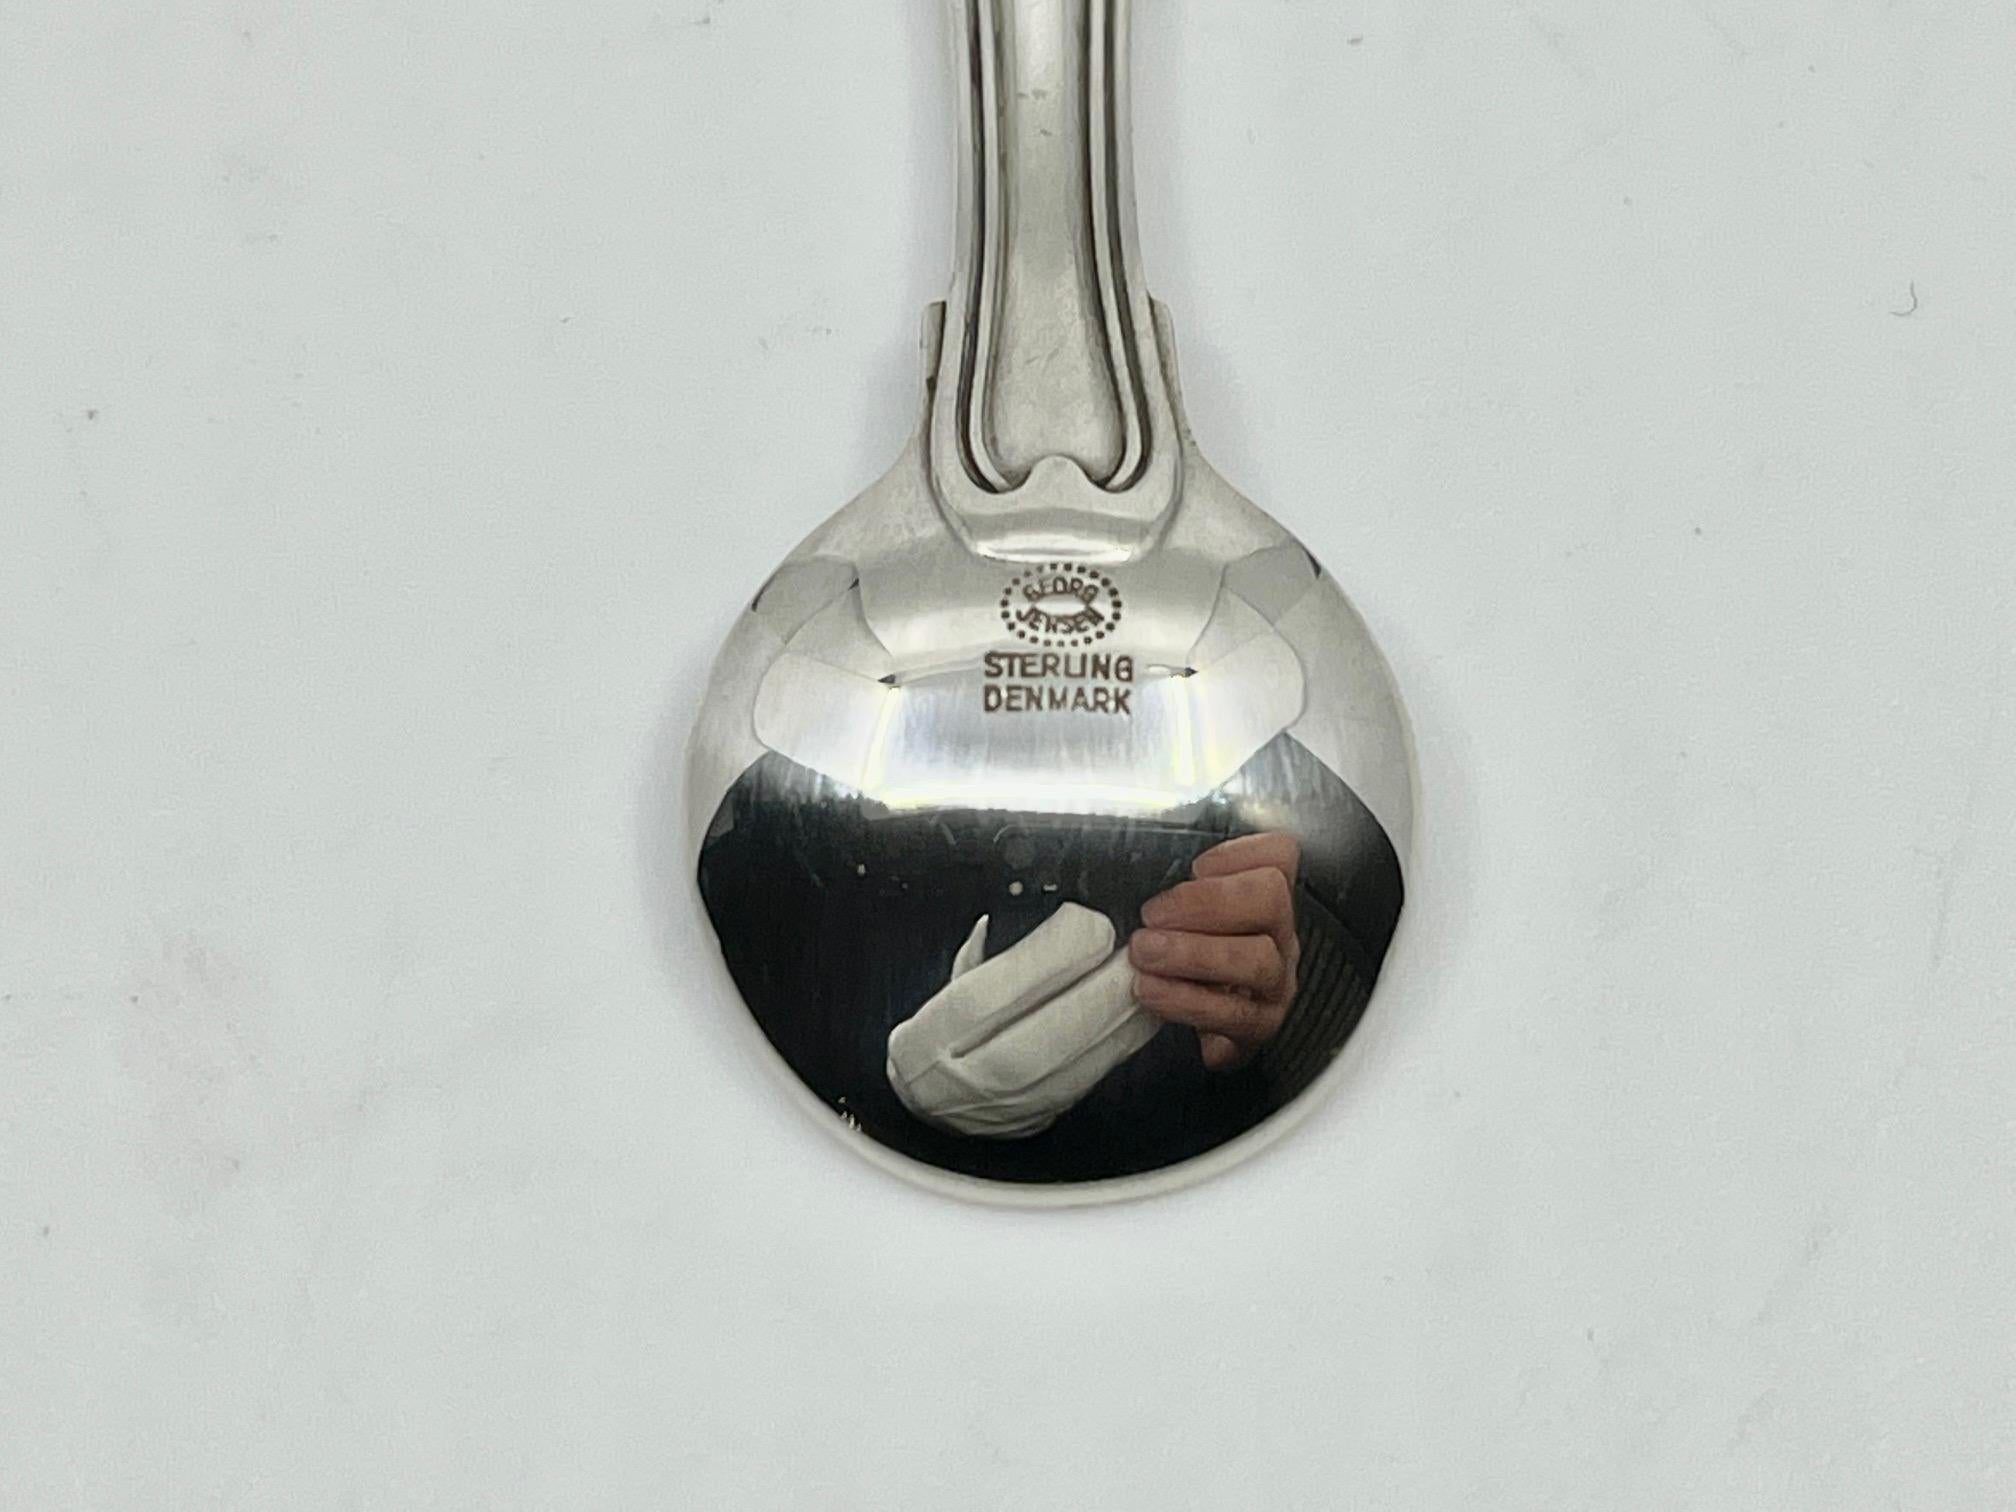 A sterling silver Georg Jensen salt spoon, item #103 in the Old Danish pattern, design #100 by Harald Nielsen from 1947.

Additional information:
Material: Sterling silver
Styles: Art Deco
Hallmarks: With Georg Jensen hallmark, made in